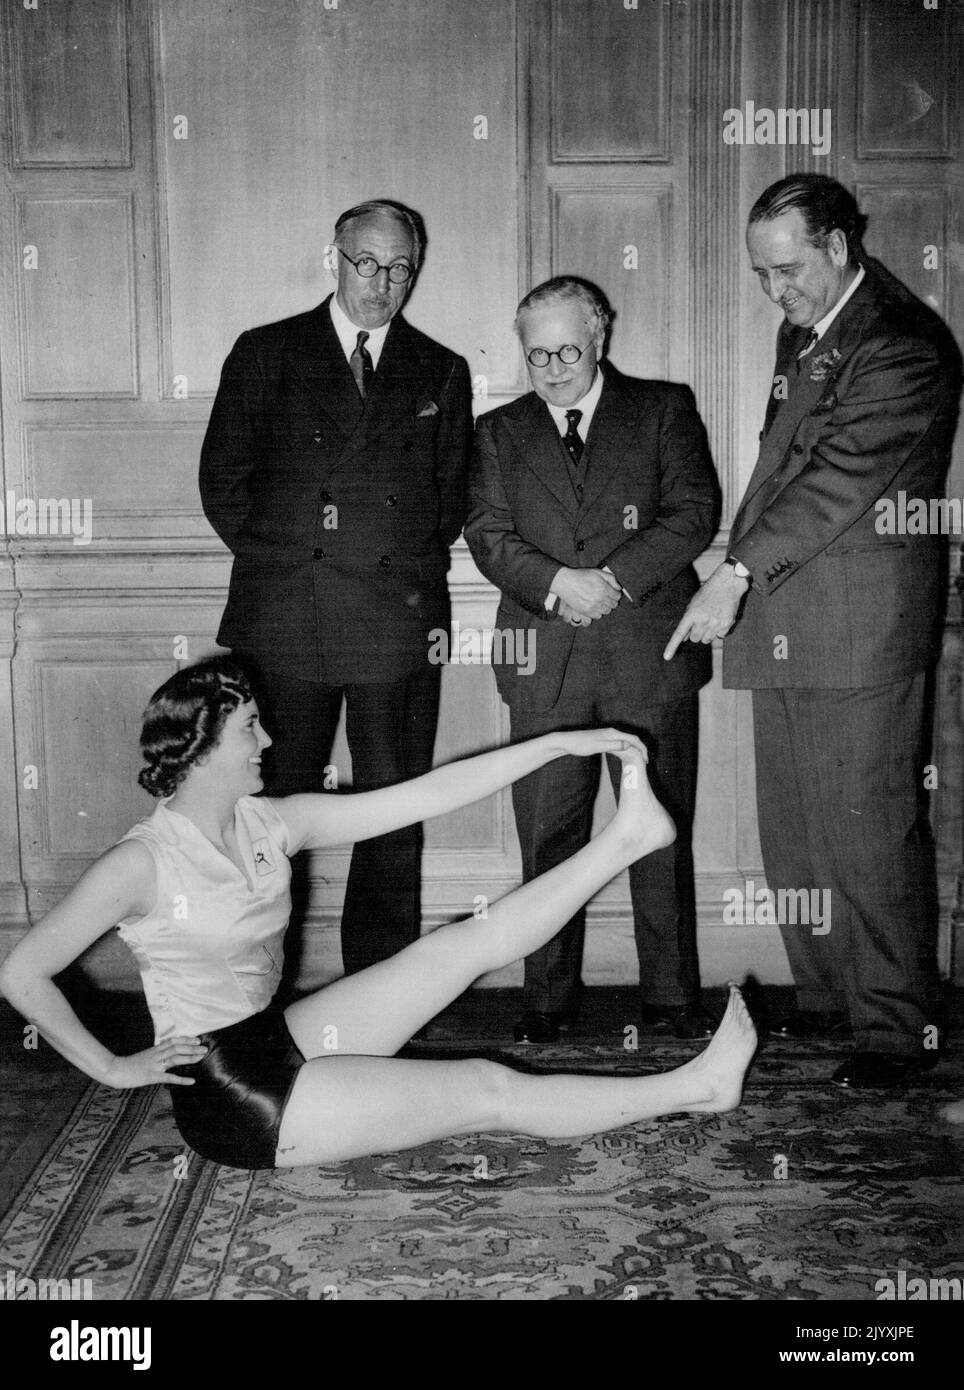 Minister Of Health Attends Health No Beauty Demonstration -- (L to R) Sir Edward Campbell, M.P., Sir Kingsley Wood and Sir Noel Curtis Bennett, K.C. watching Prunella Stack giving a demonstration. Prunella Stack and members of the Women's League of health and beauty cave a demonstration at the Hotel Metropole this evening, attended by Sir Kingsley Wood, Minister of Health. March 9, 1938. (Photo by Keystone). Stock Photo